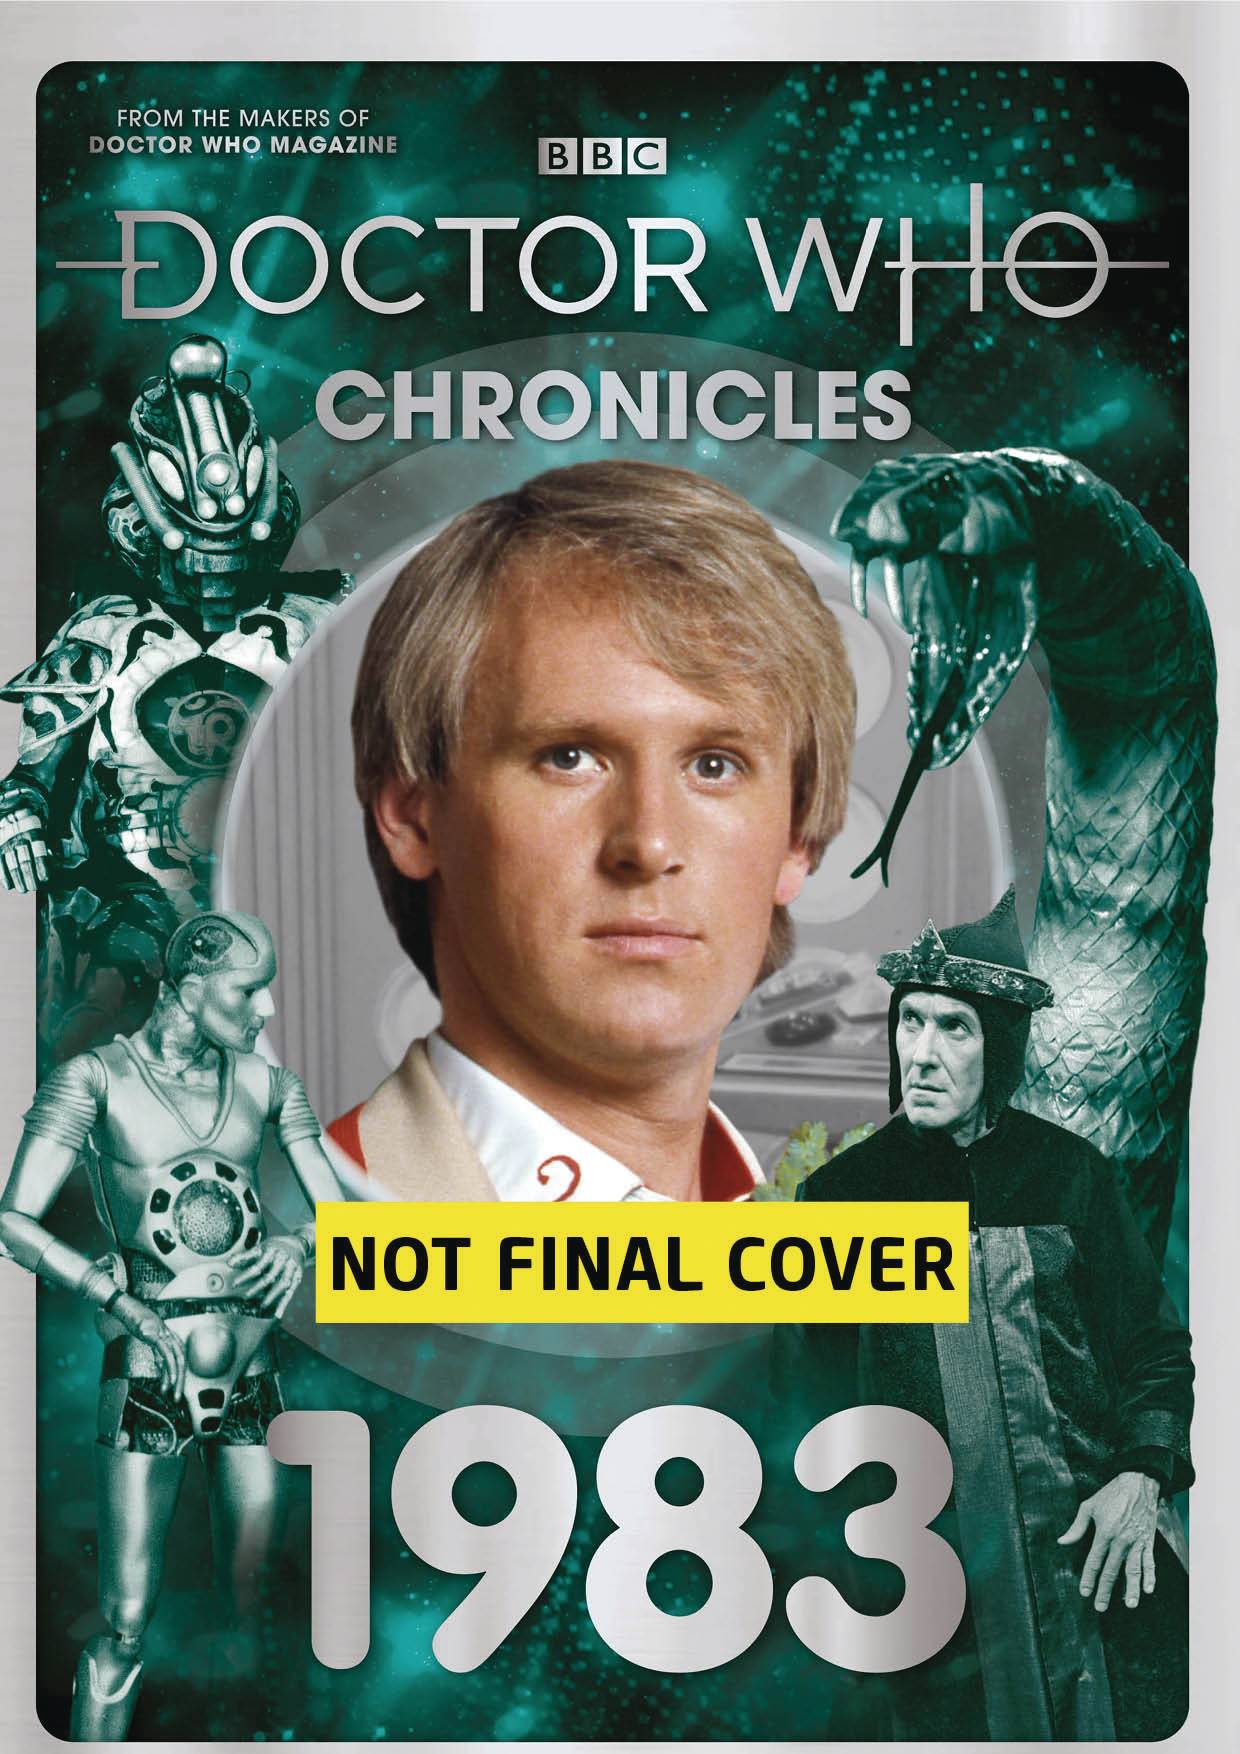 DOCTOR WHO CHRONICLES VOL 04